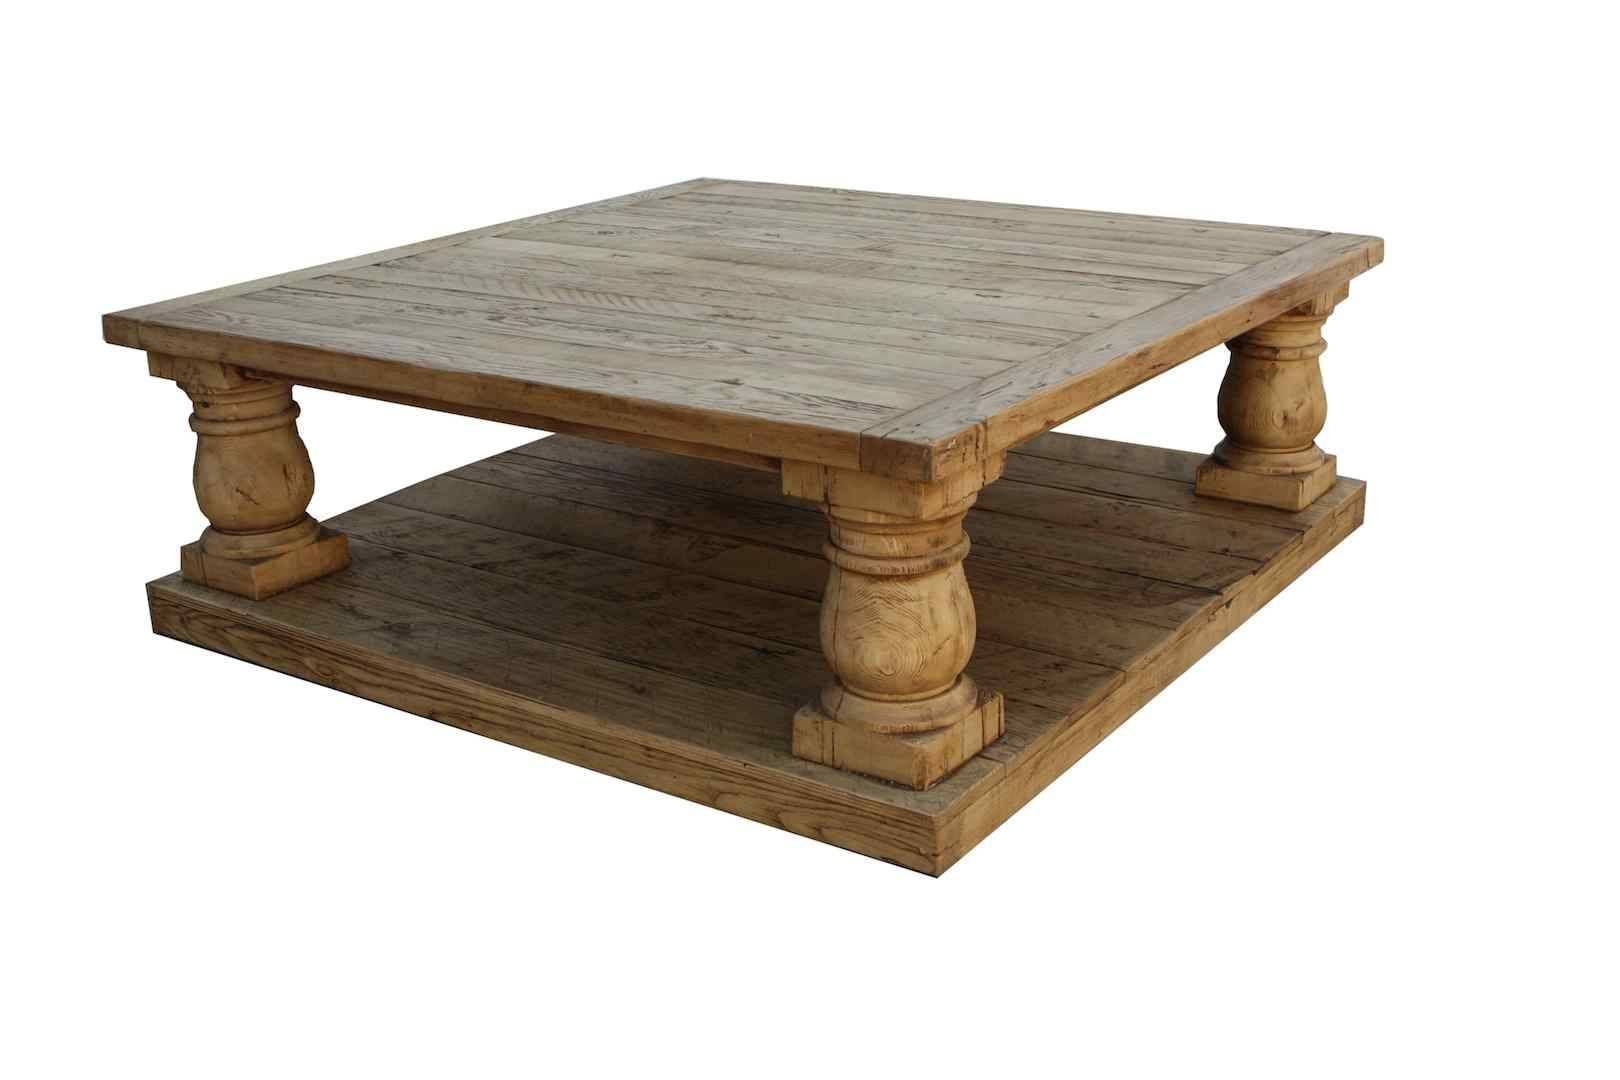 Large Square Coffee Table Increasing Interior Elegance – Ruchi Designs Throughout Square Wooden Coffee Table (View 5 of 15)